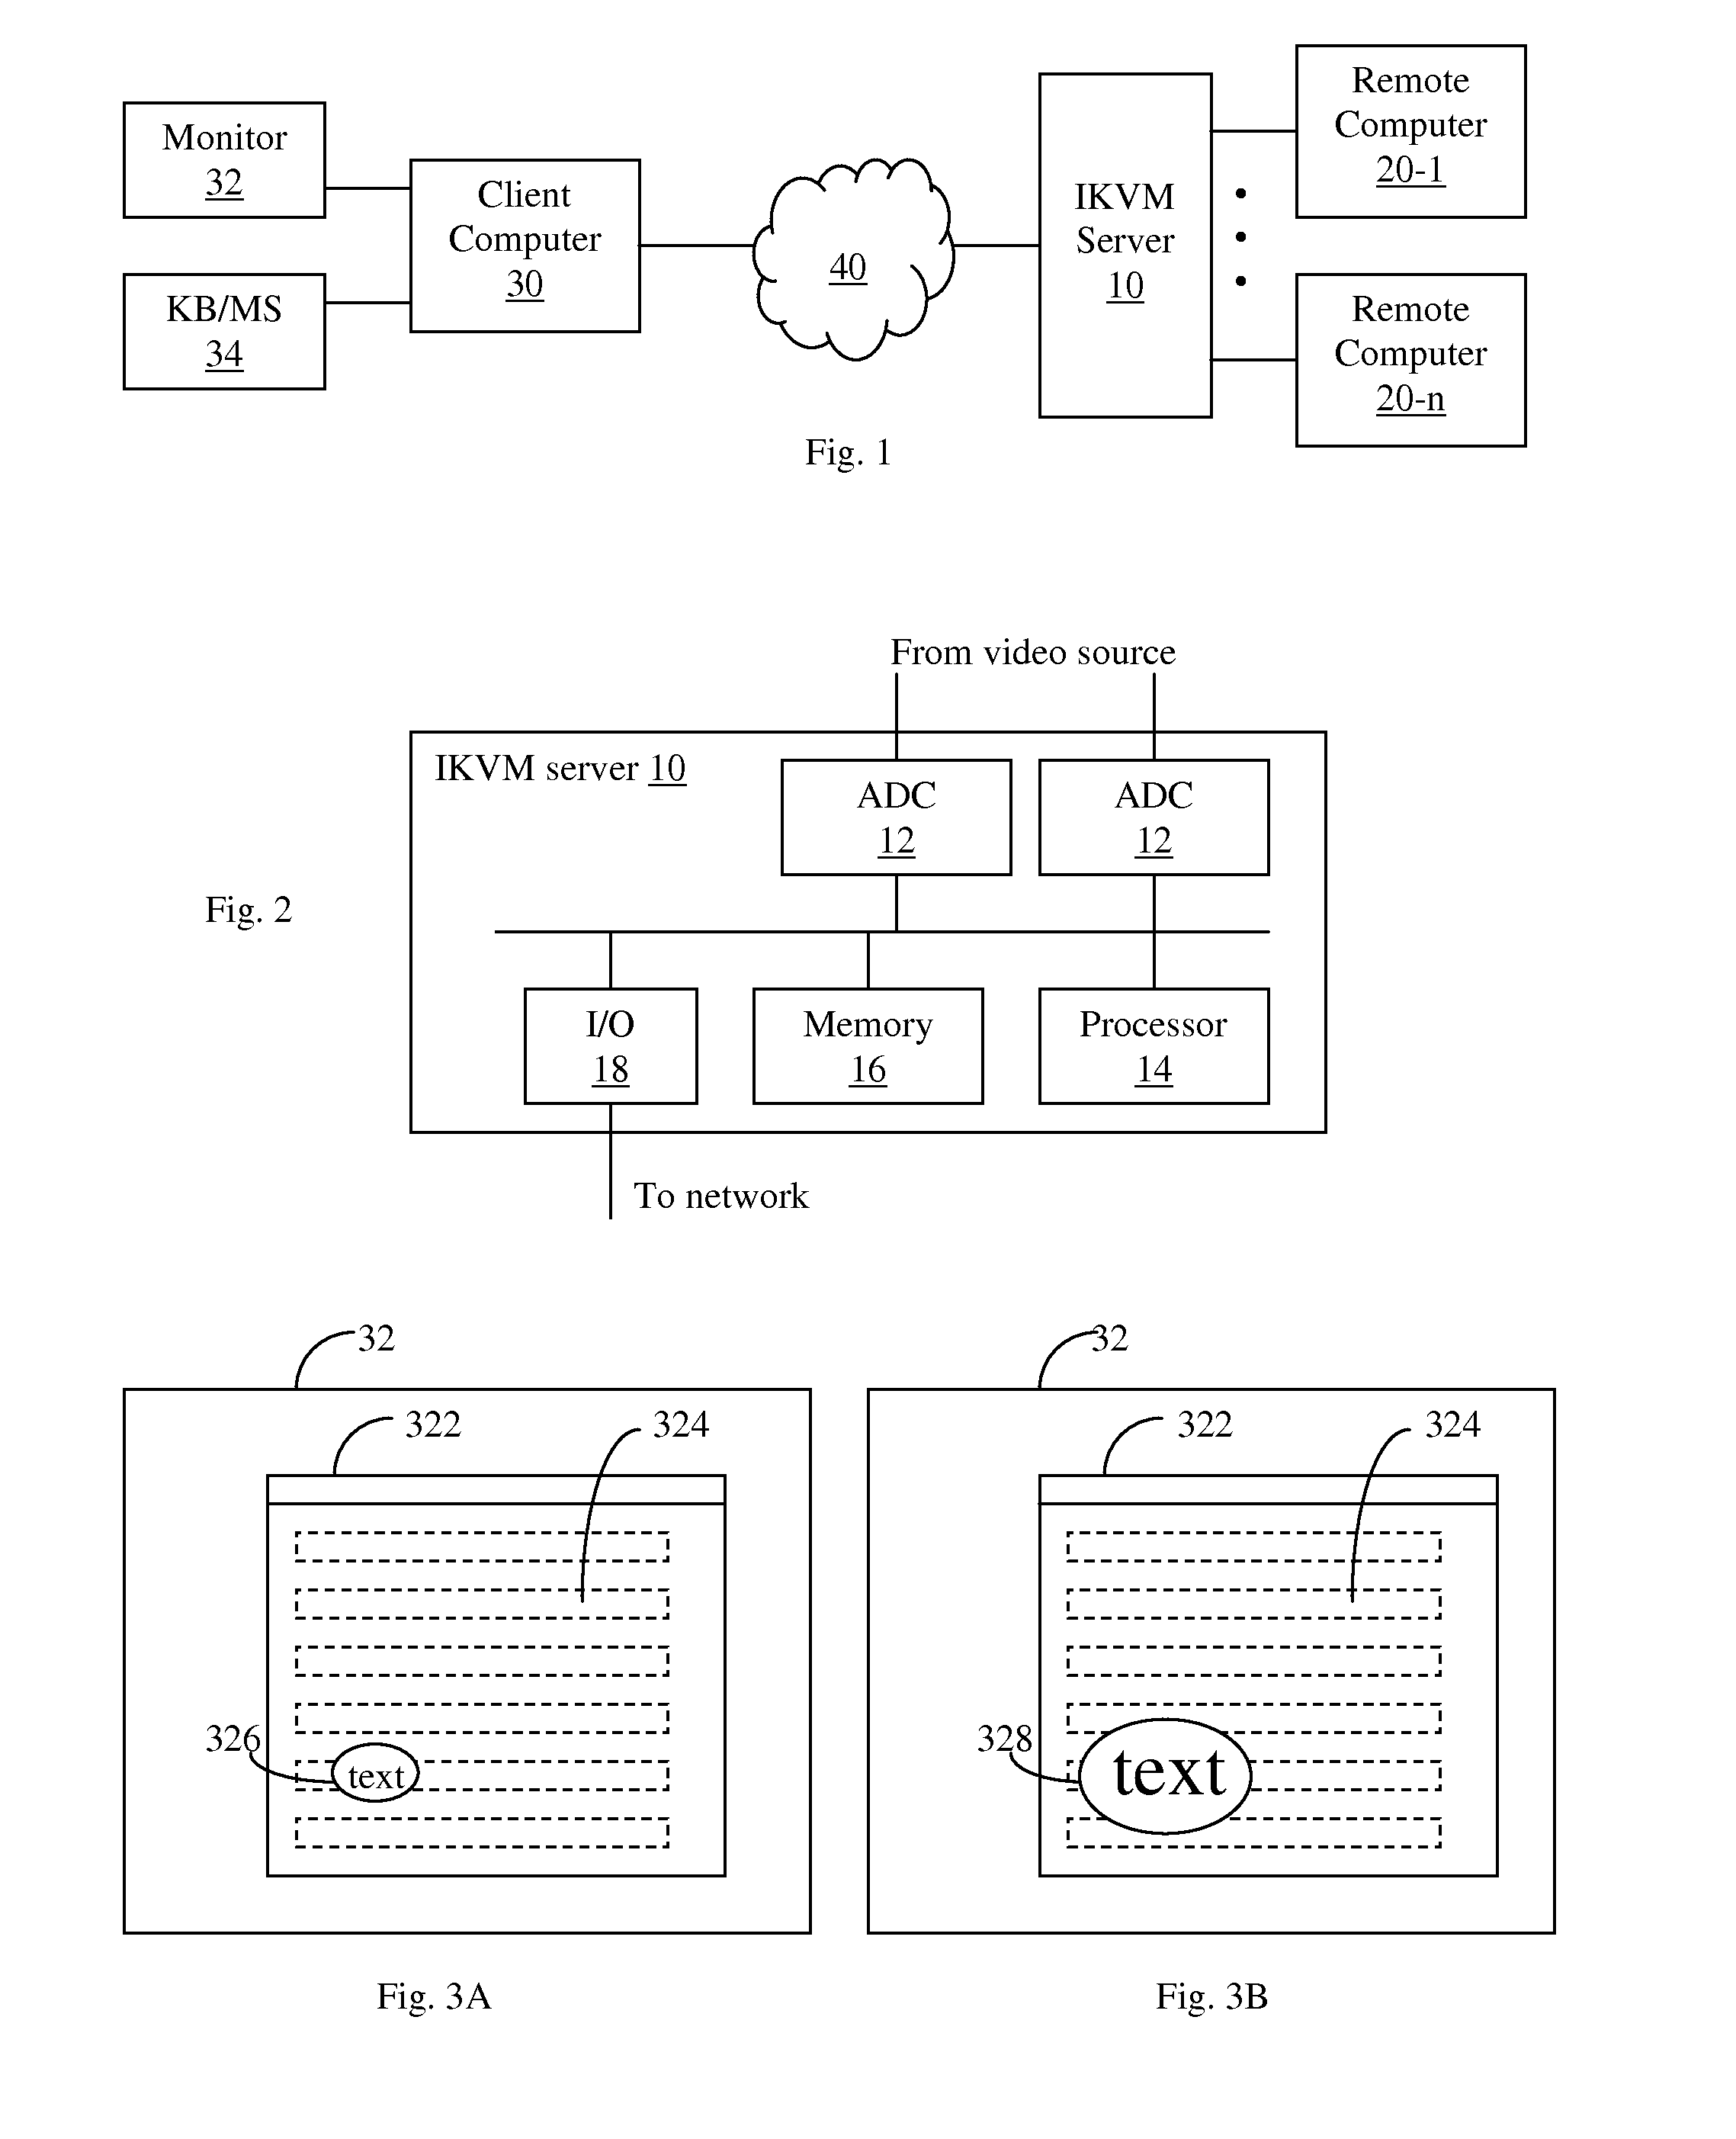 Image processing and transmission in a KVM switch system with special handling for regions of interest